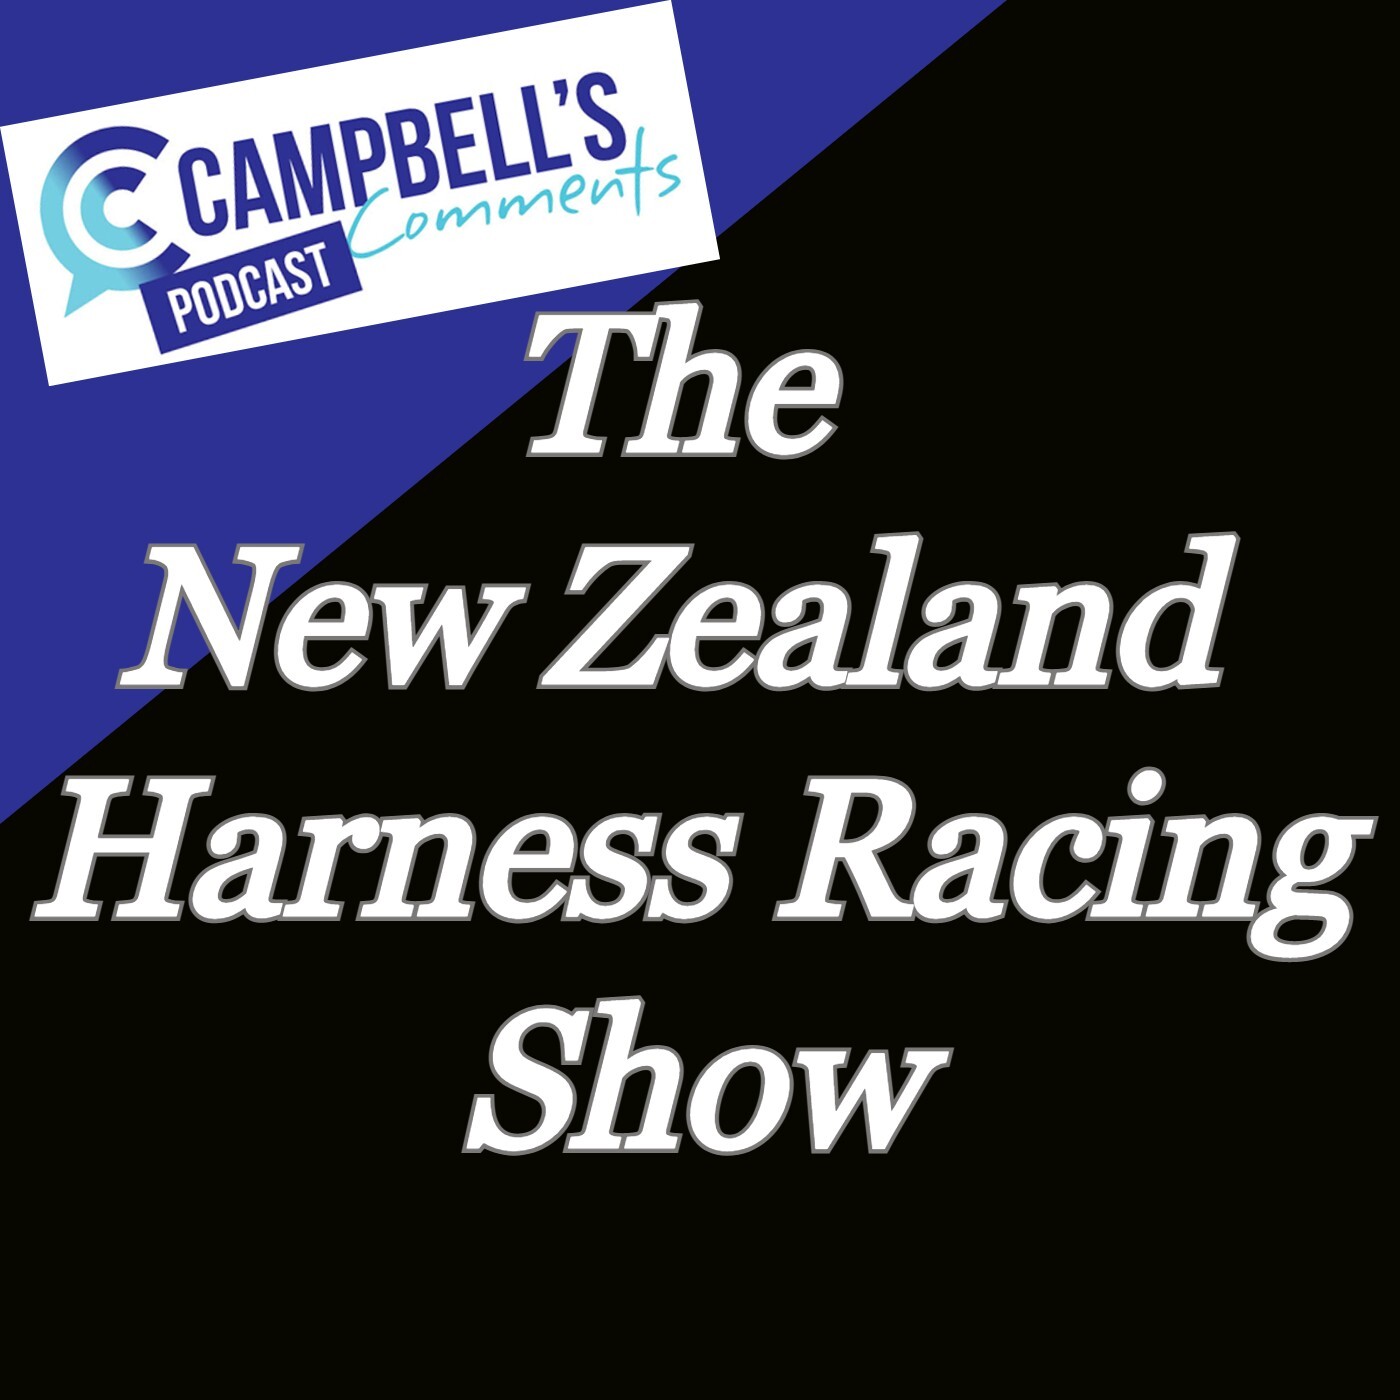 You are currently viewing 223: Campbells Comments The New Zealand Harness Racing Show